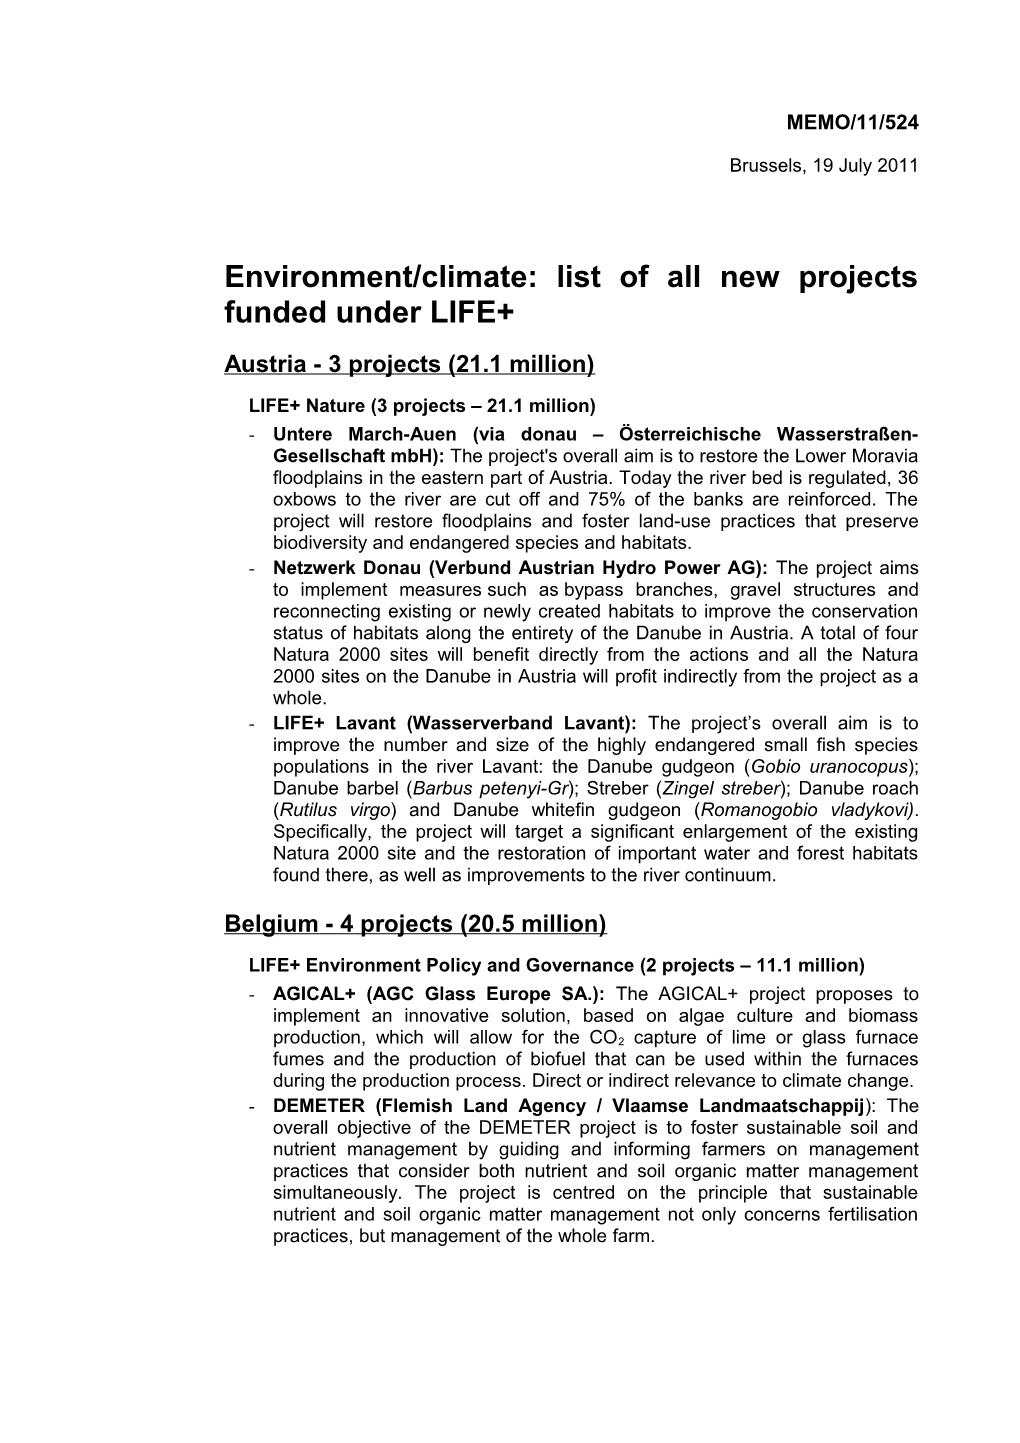 Environment/Climate: List of All New Projects Funded Under LIFE+